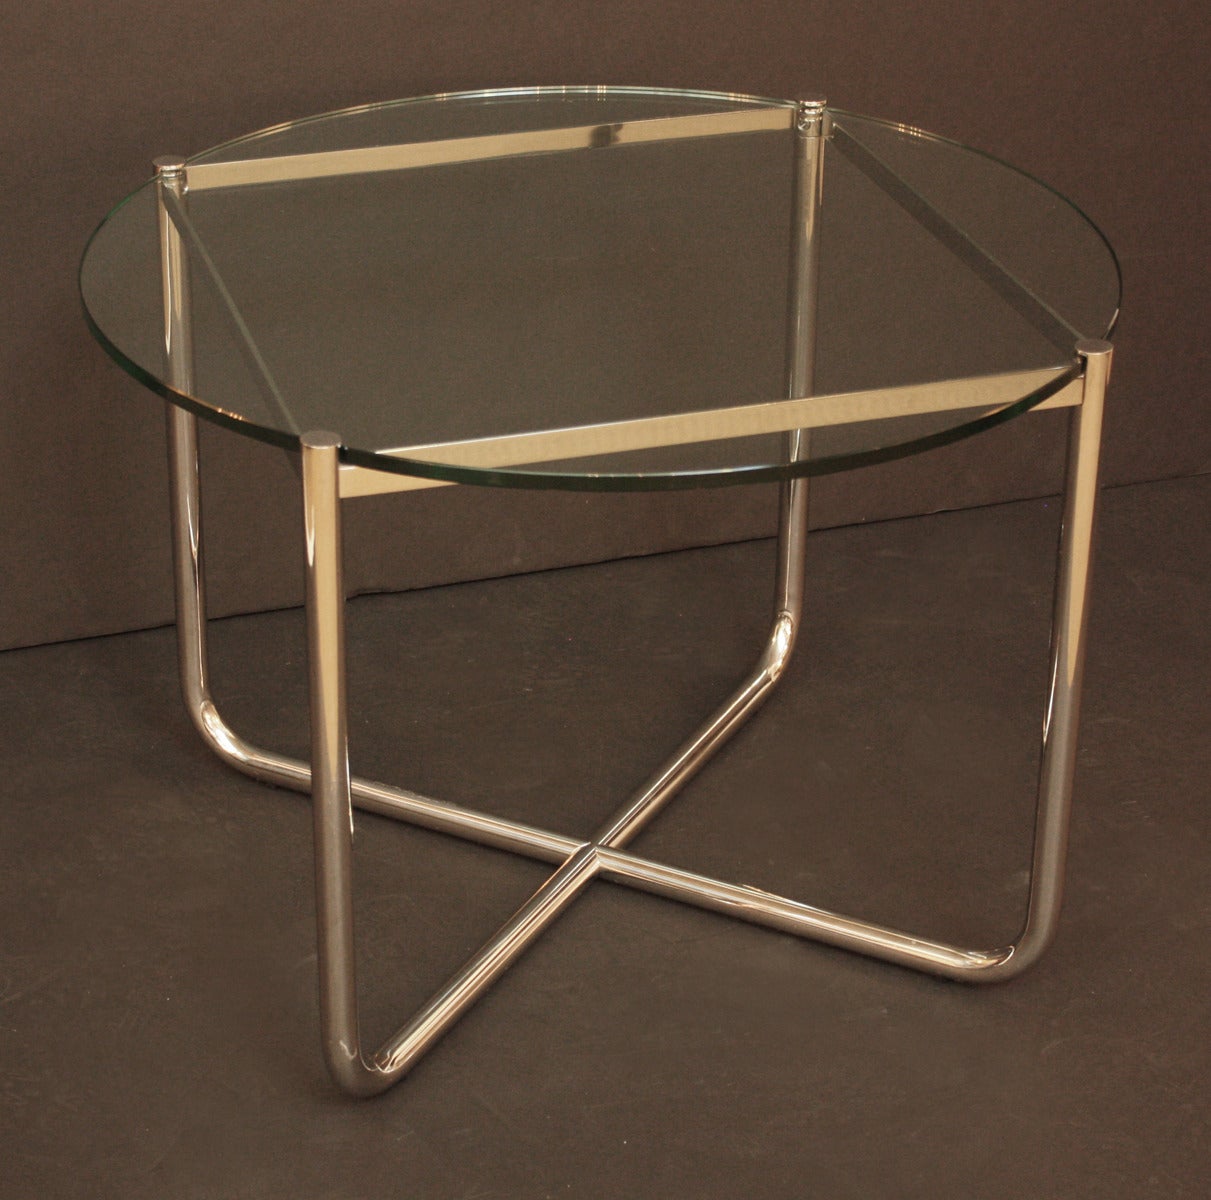 Ludwig Mies van der Rohe's 1927 MR side table manufactured by Knoll since 1977, bent stainless steel tubular frame with a round glass top

Knoll Studio mark (see Image 3)